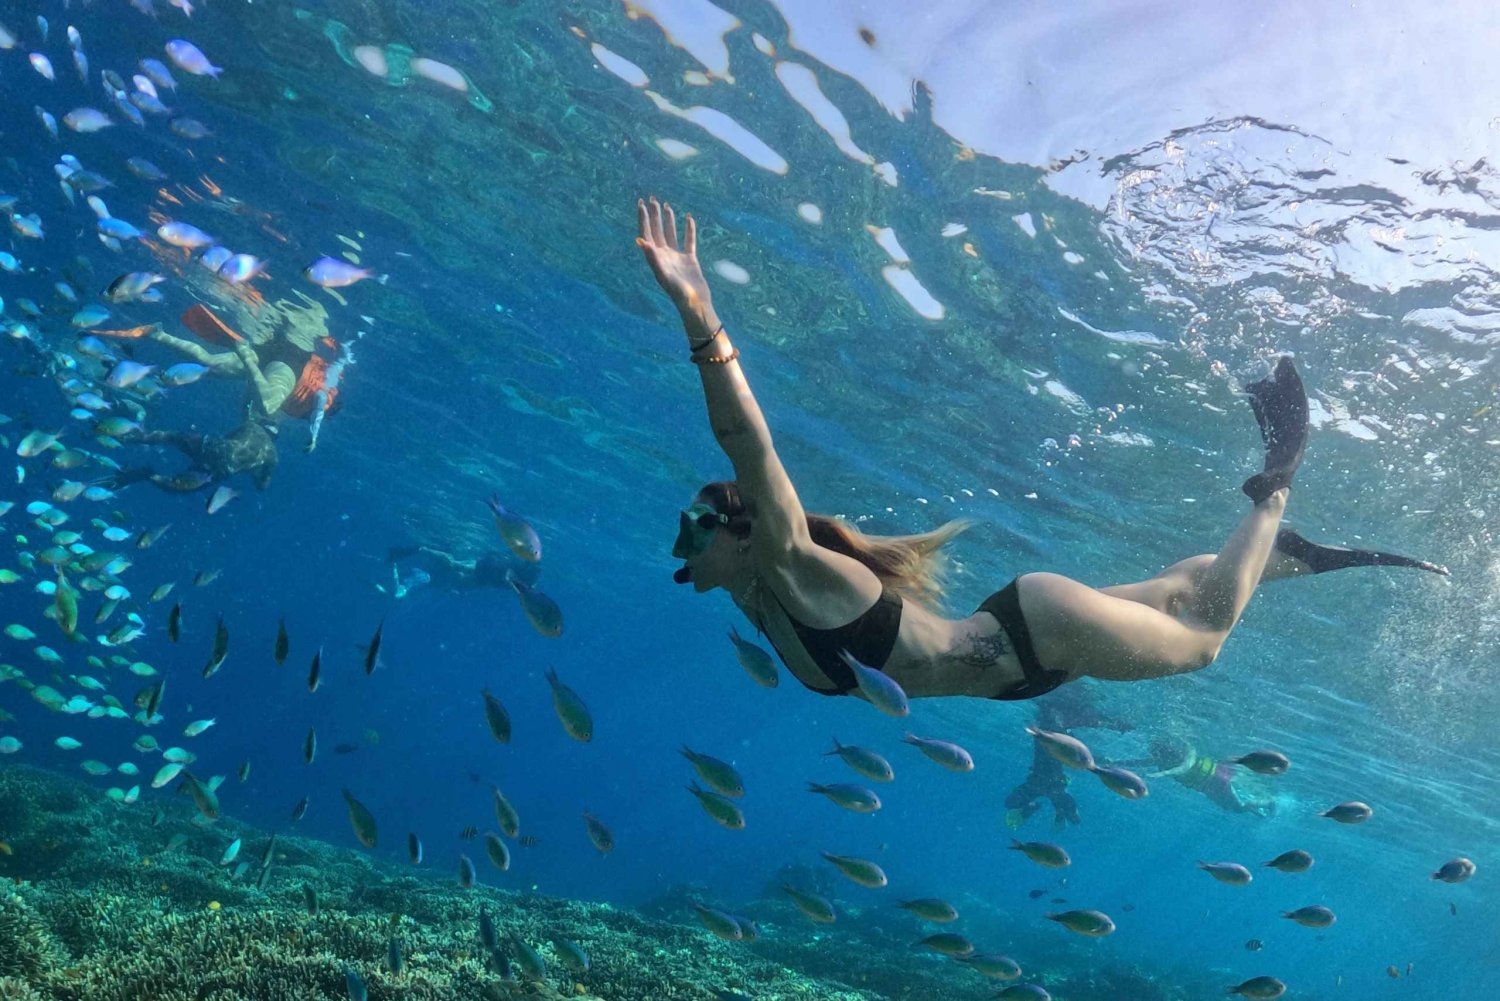 Gili Islands: Private or Shared Snorkeling Boat Trip